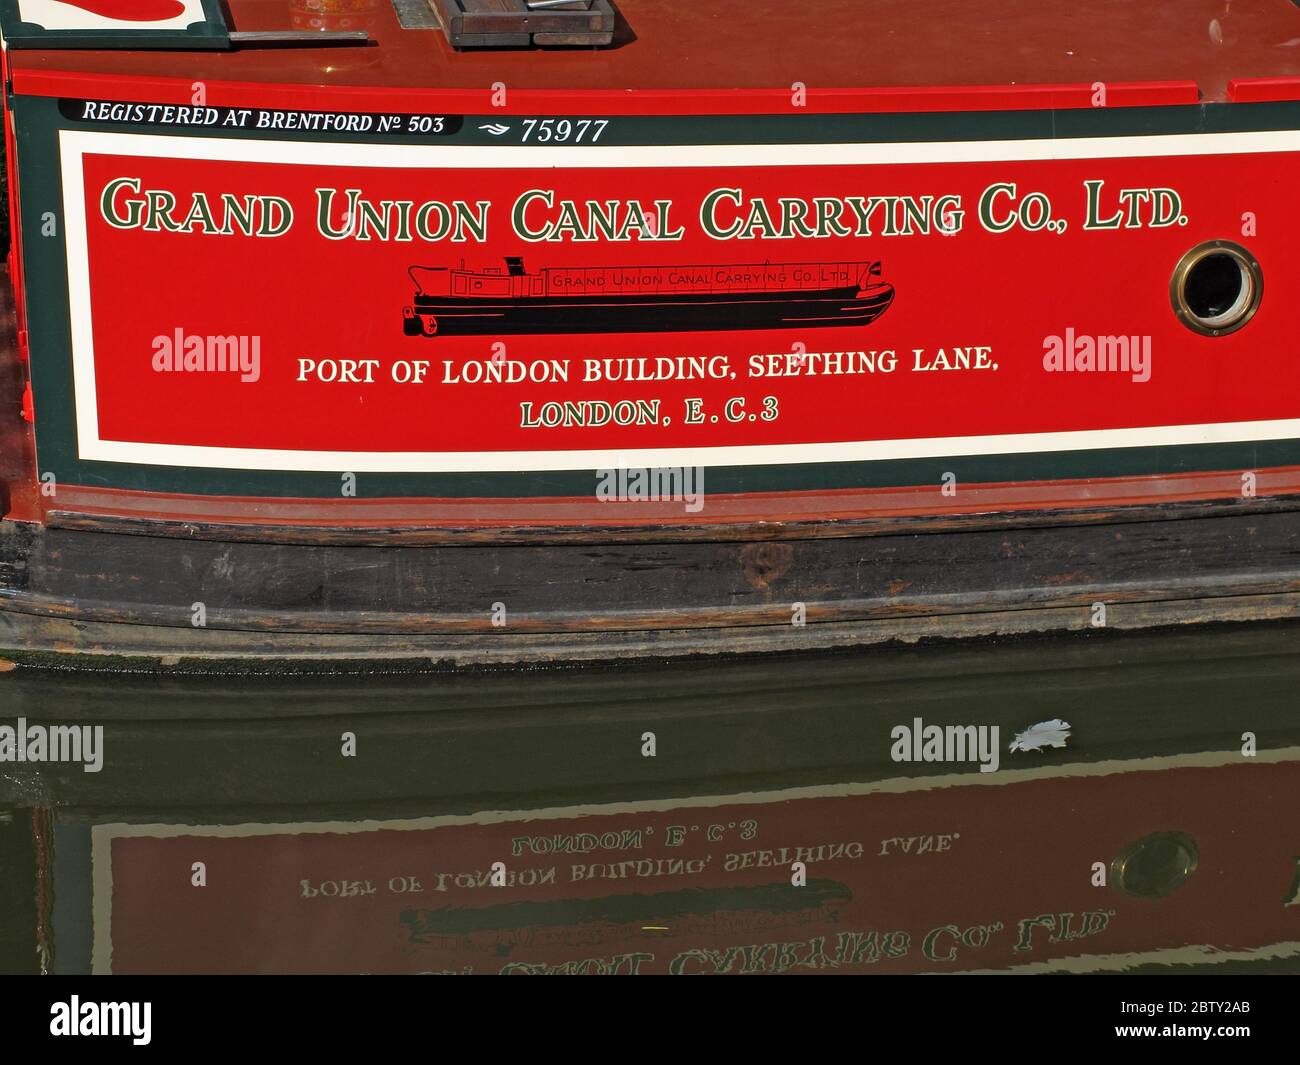 Pavo No 327,Red barge,Grand Union Canal Carrying Co Ltd,registered at Brentford no 503,75977,Port Of London Building,Seething Lane,EC3 Stock Photo